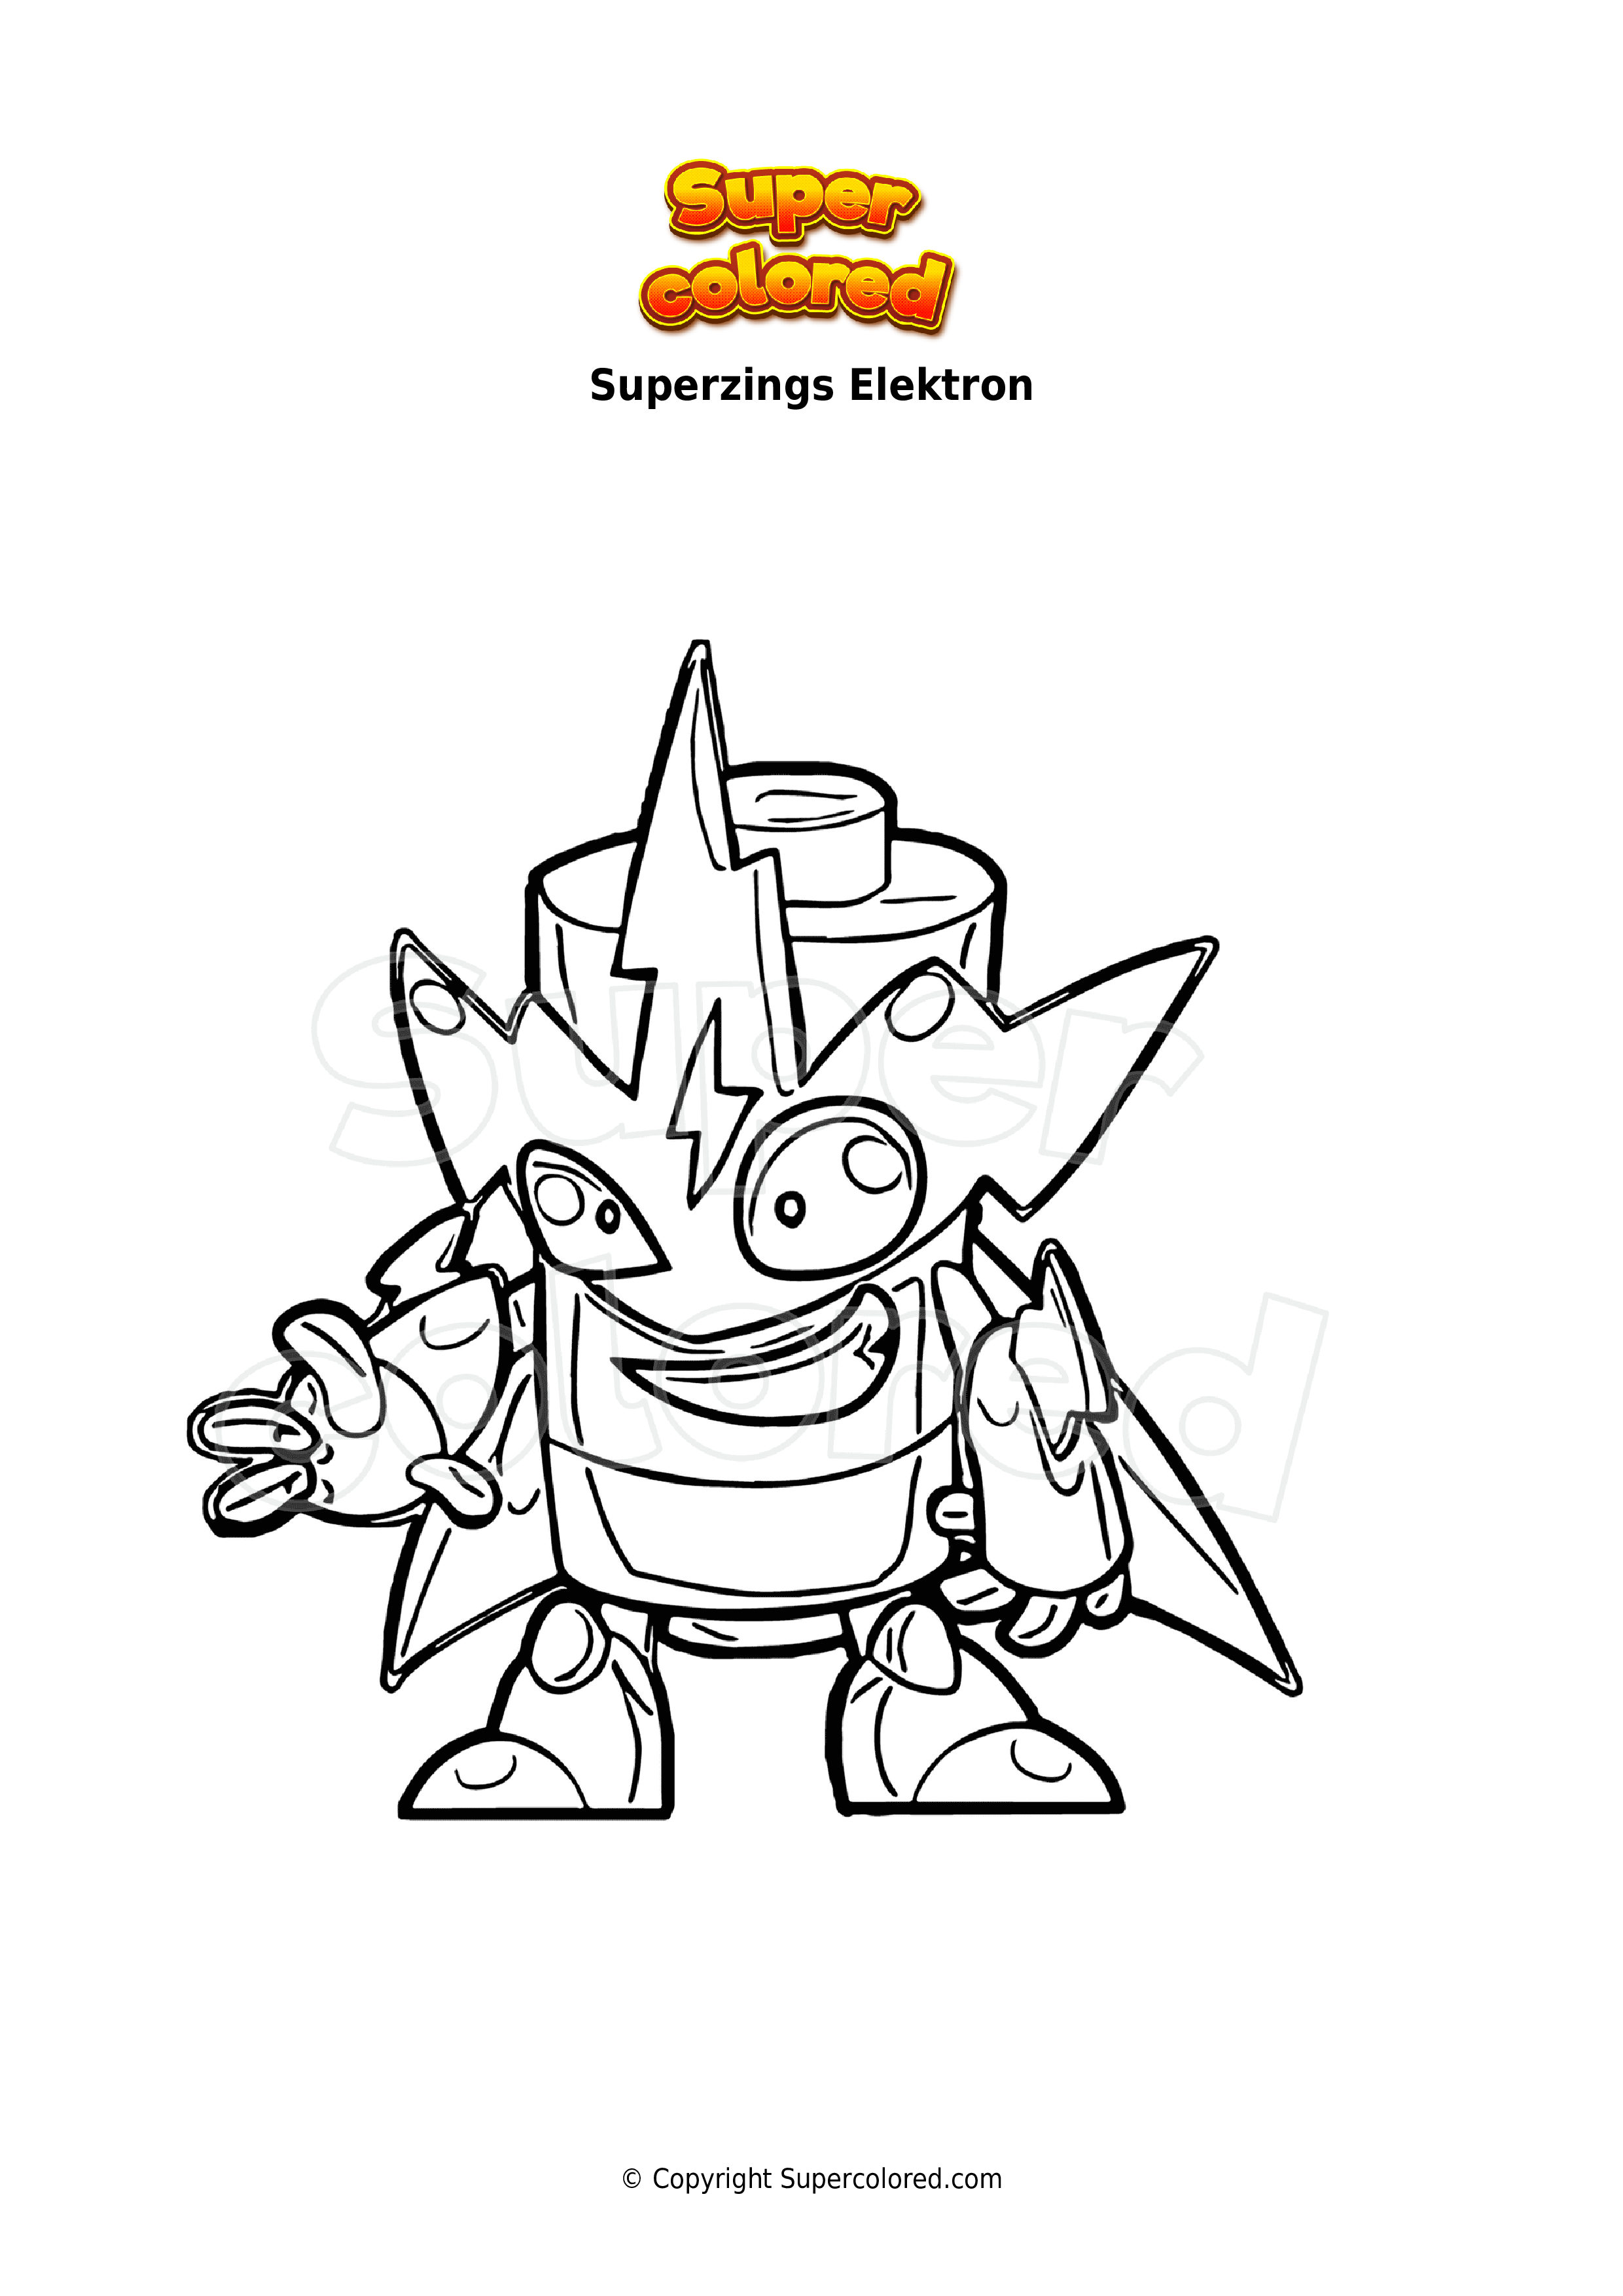 Coloring Pages - Superzings - Supercolored